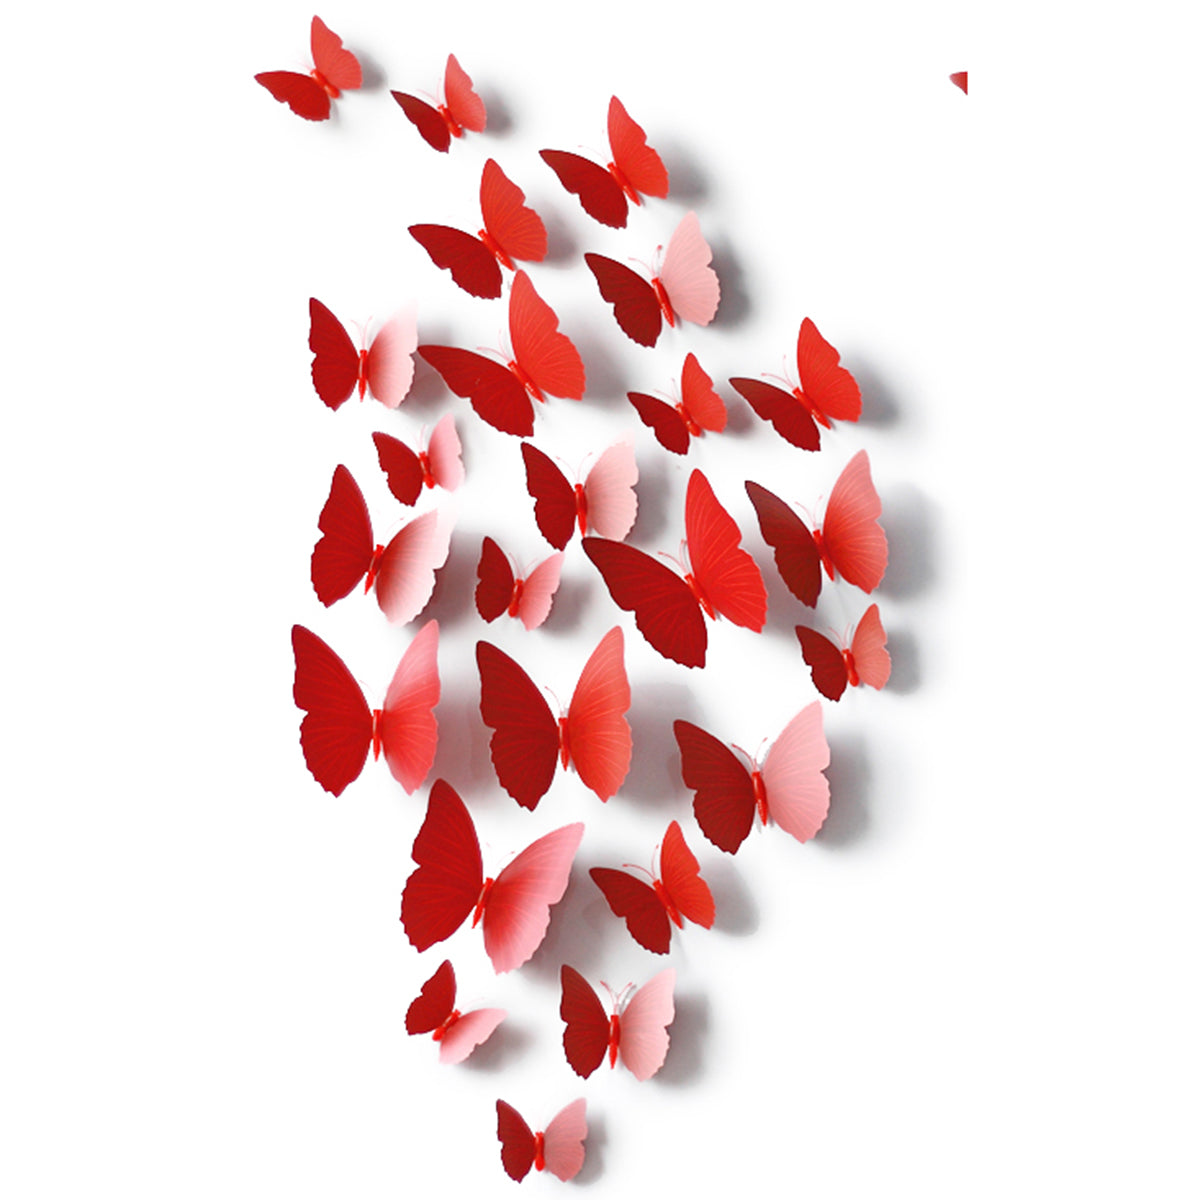 24 pieces different size red butterflies display with a white background. 